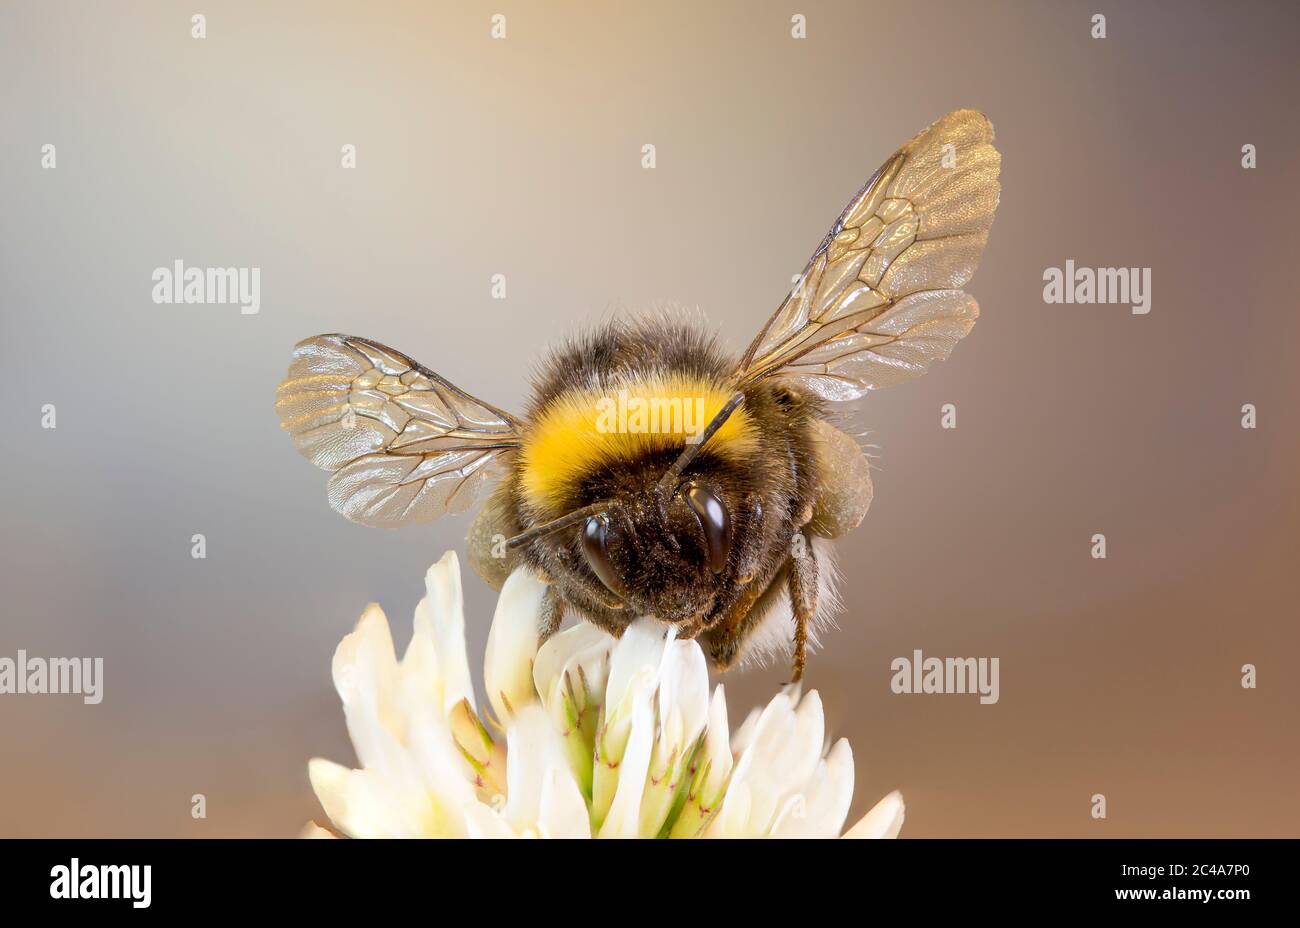 Detailed, macro, front view close up of wild UK bumble bee isolated on single white clover flower. British bumblebees. Stock Photo